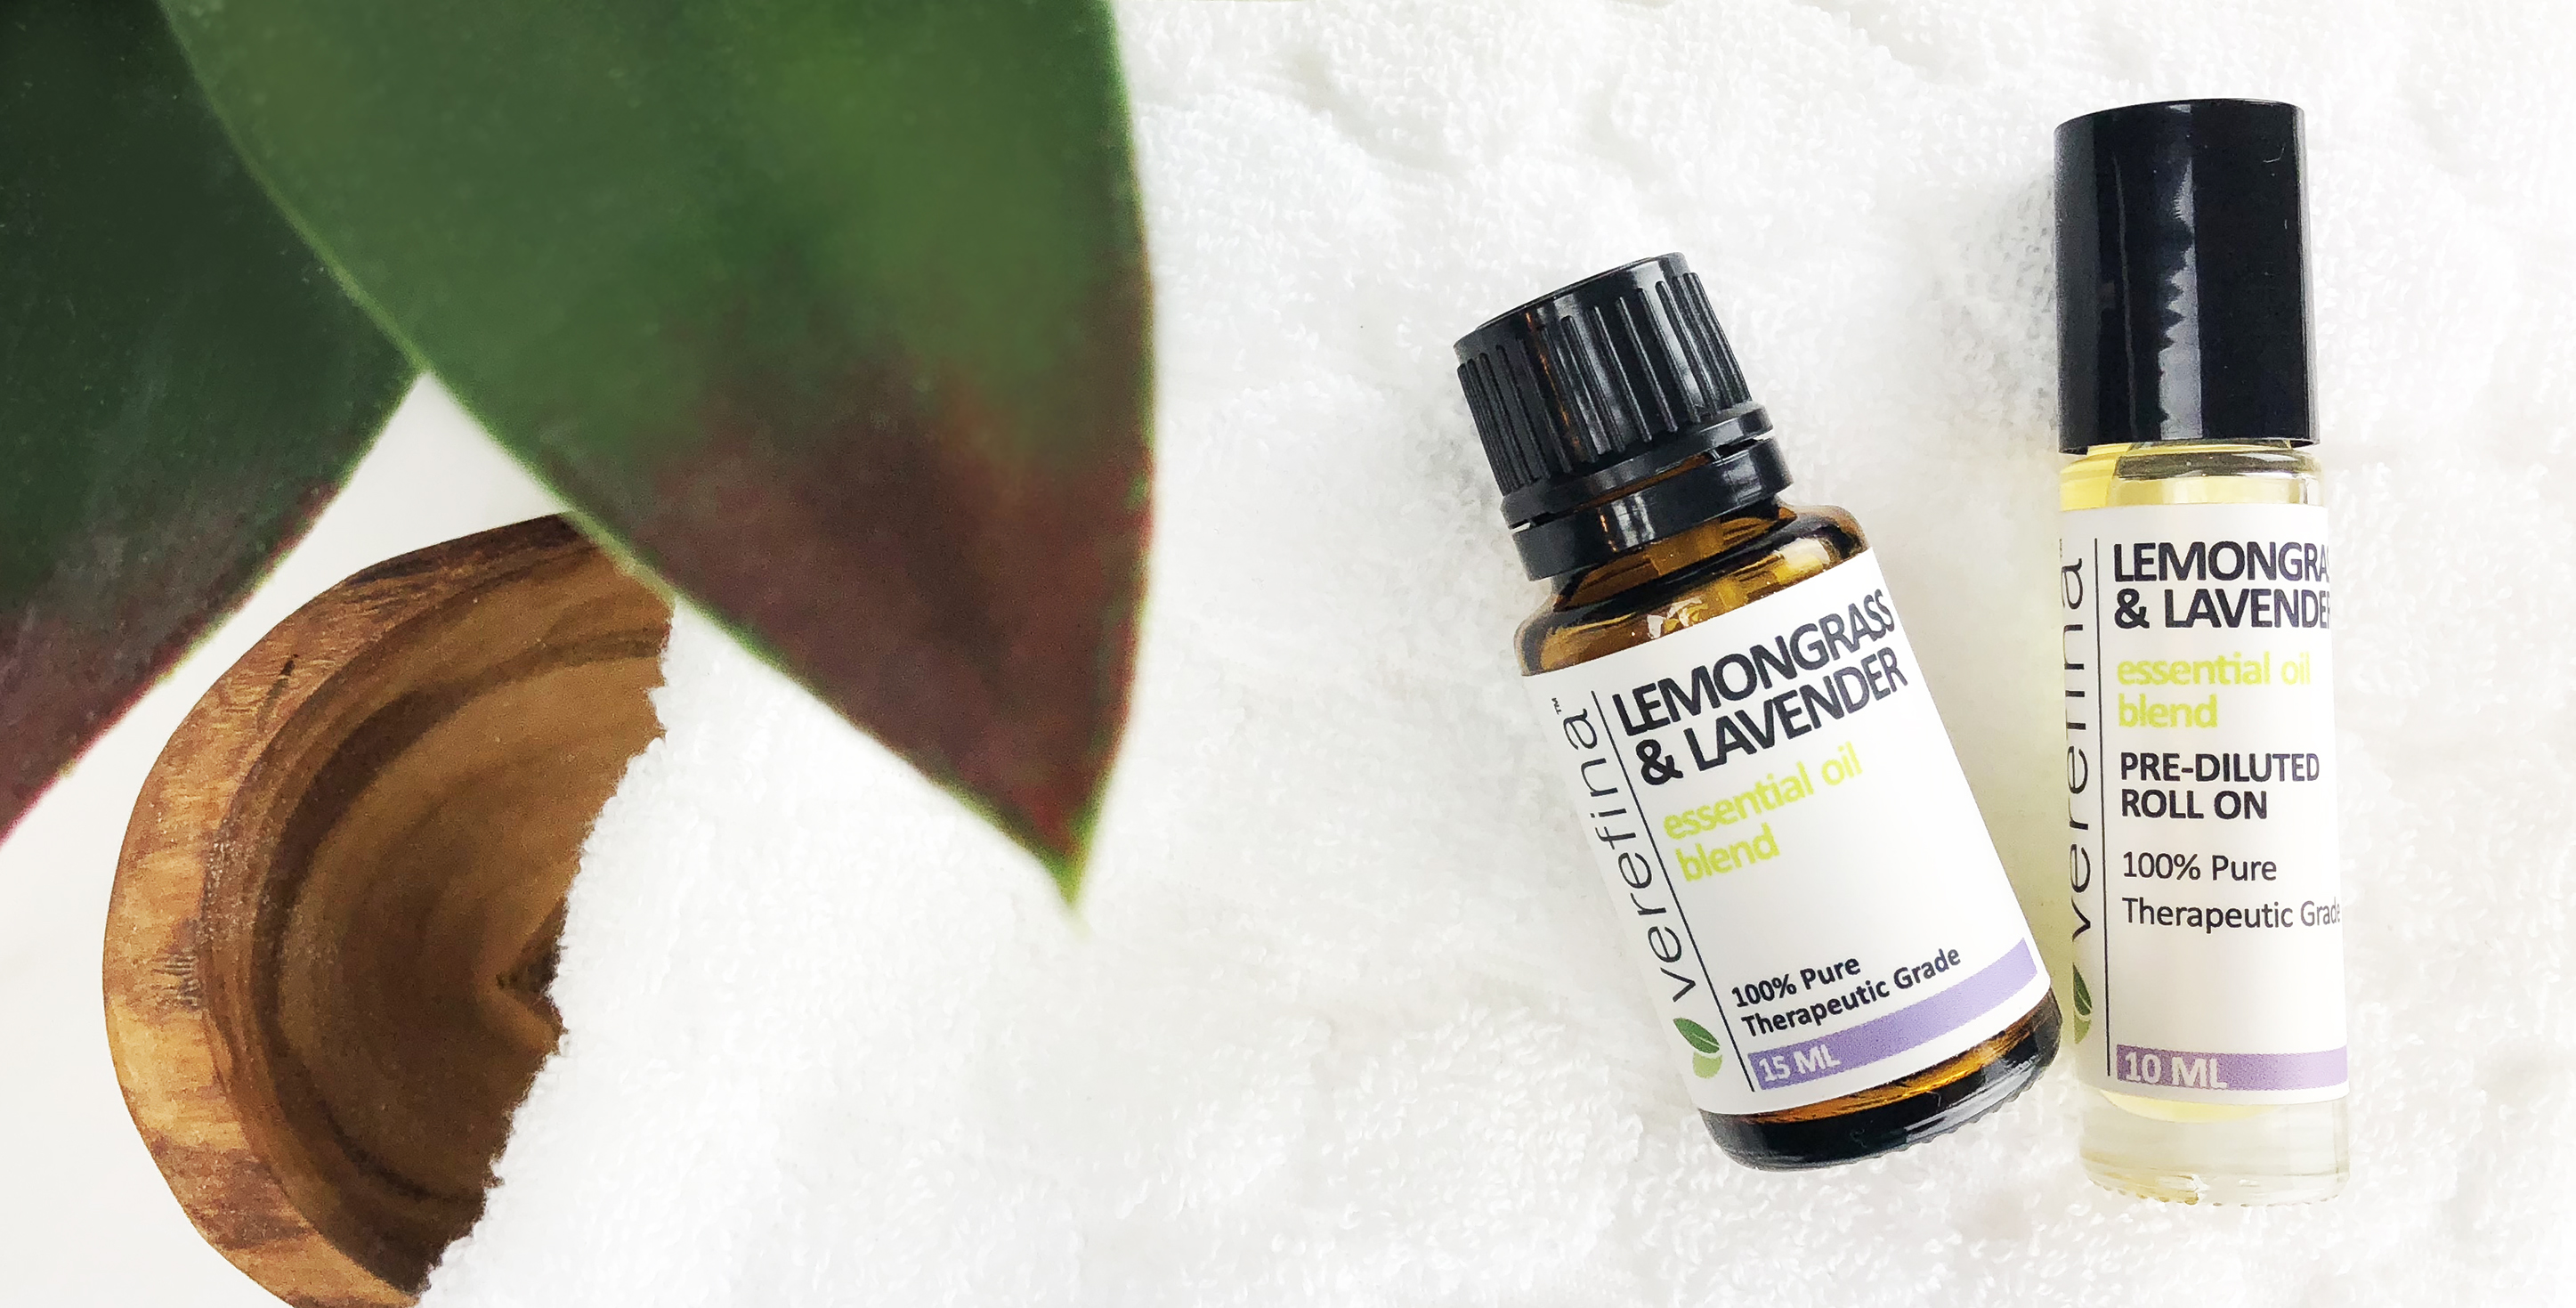 Balance Your Chakras and More With Lemongrass & Lavender Essential Oil Blend  - Verefina